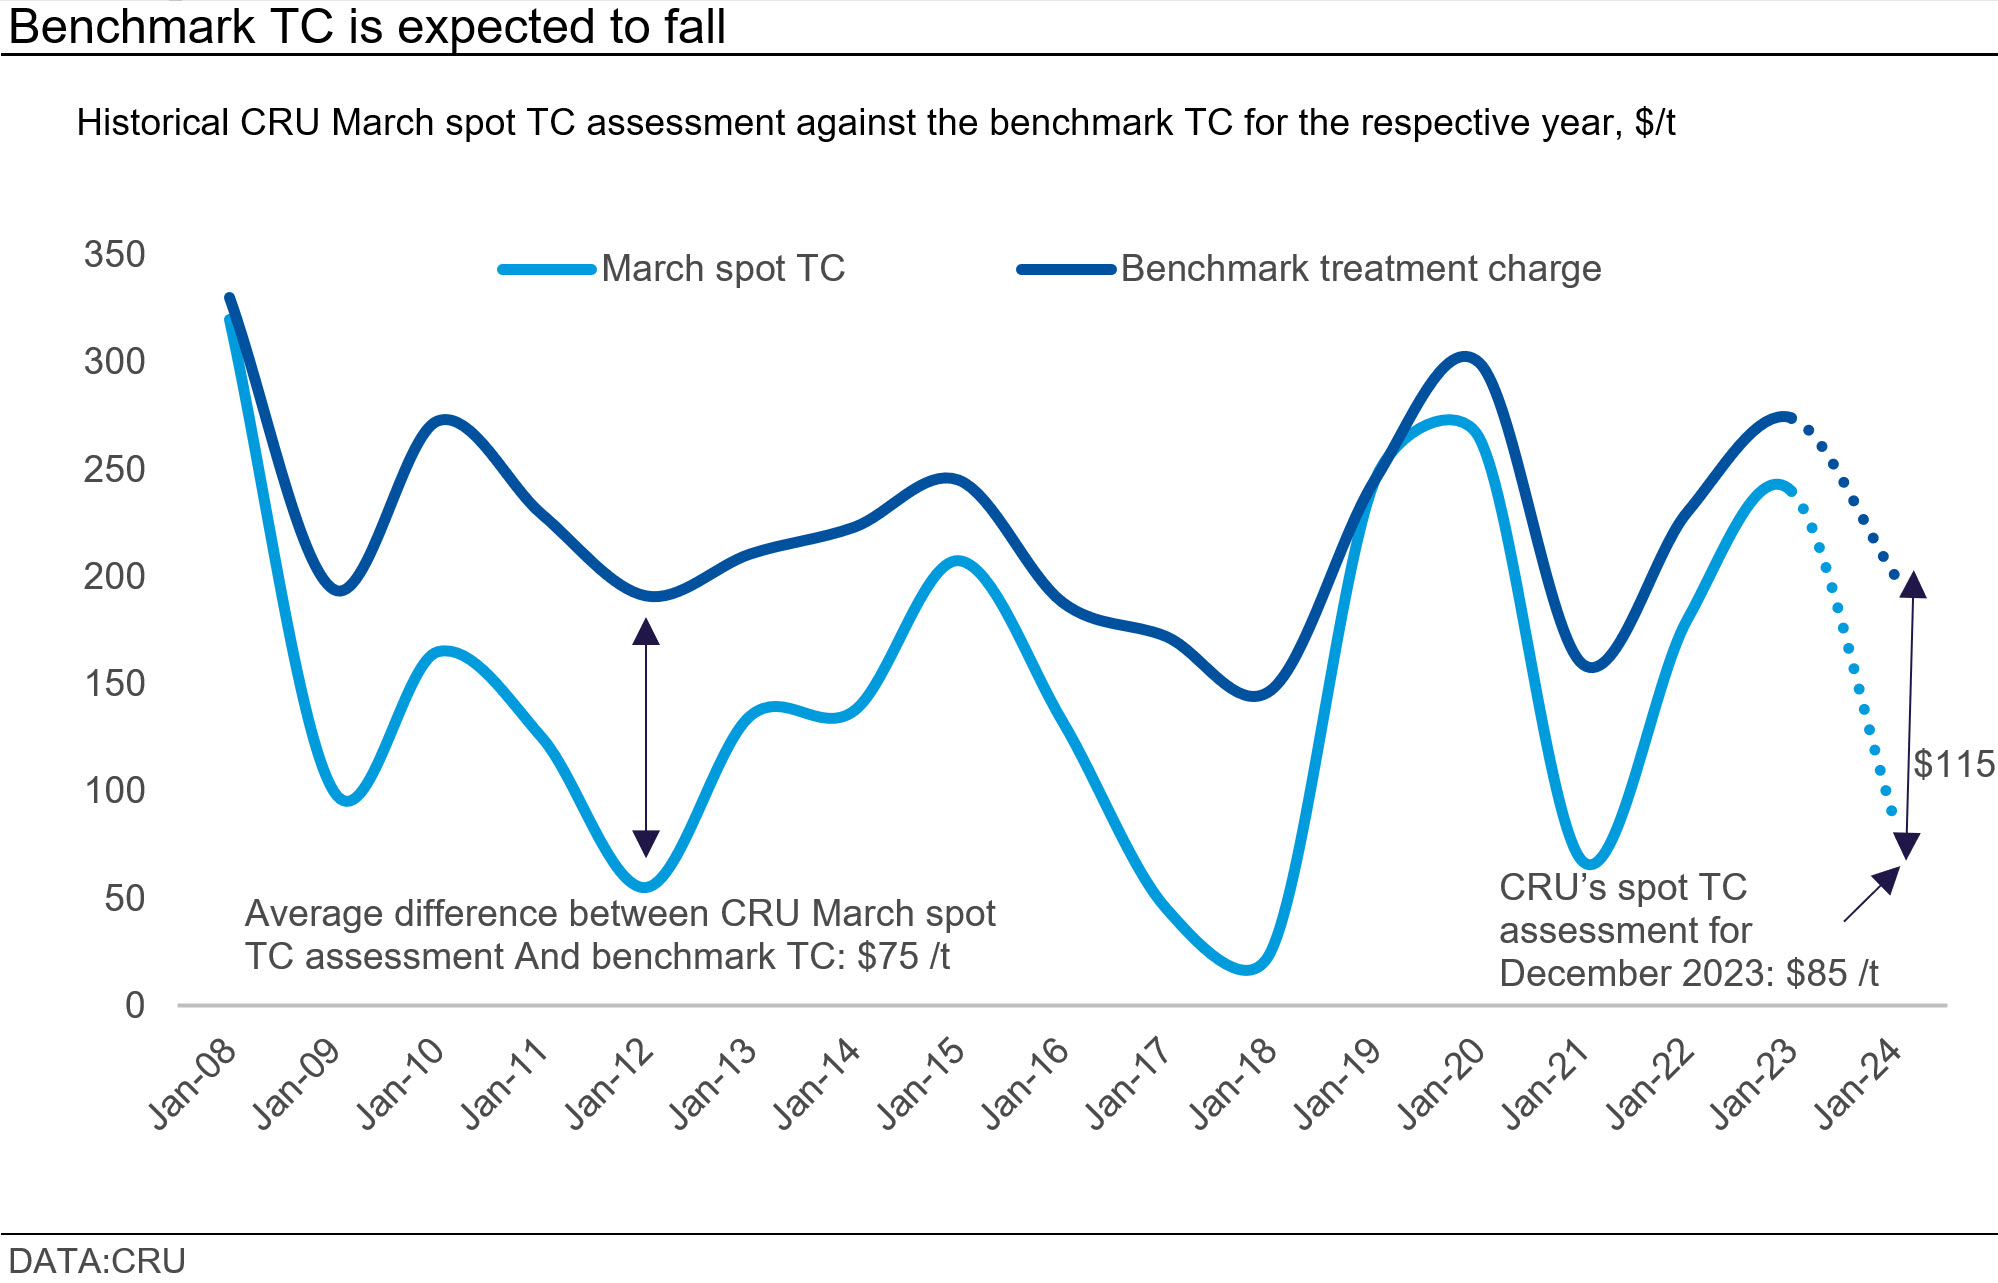 graph depicting that benchmark TC is expected to fall